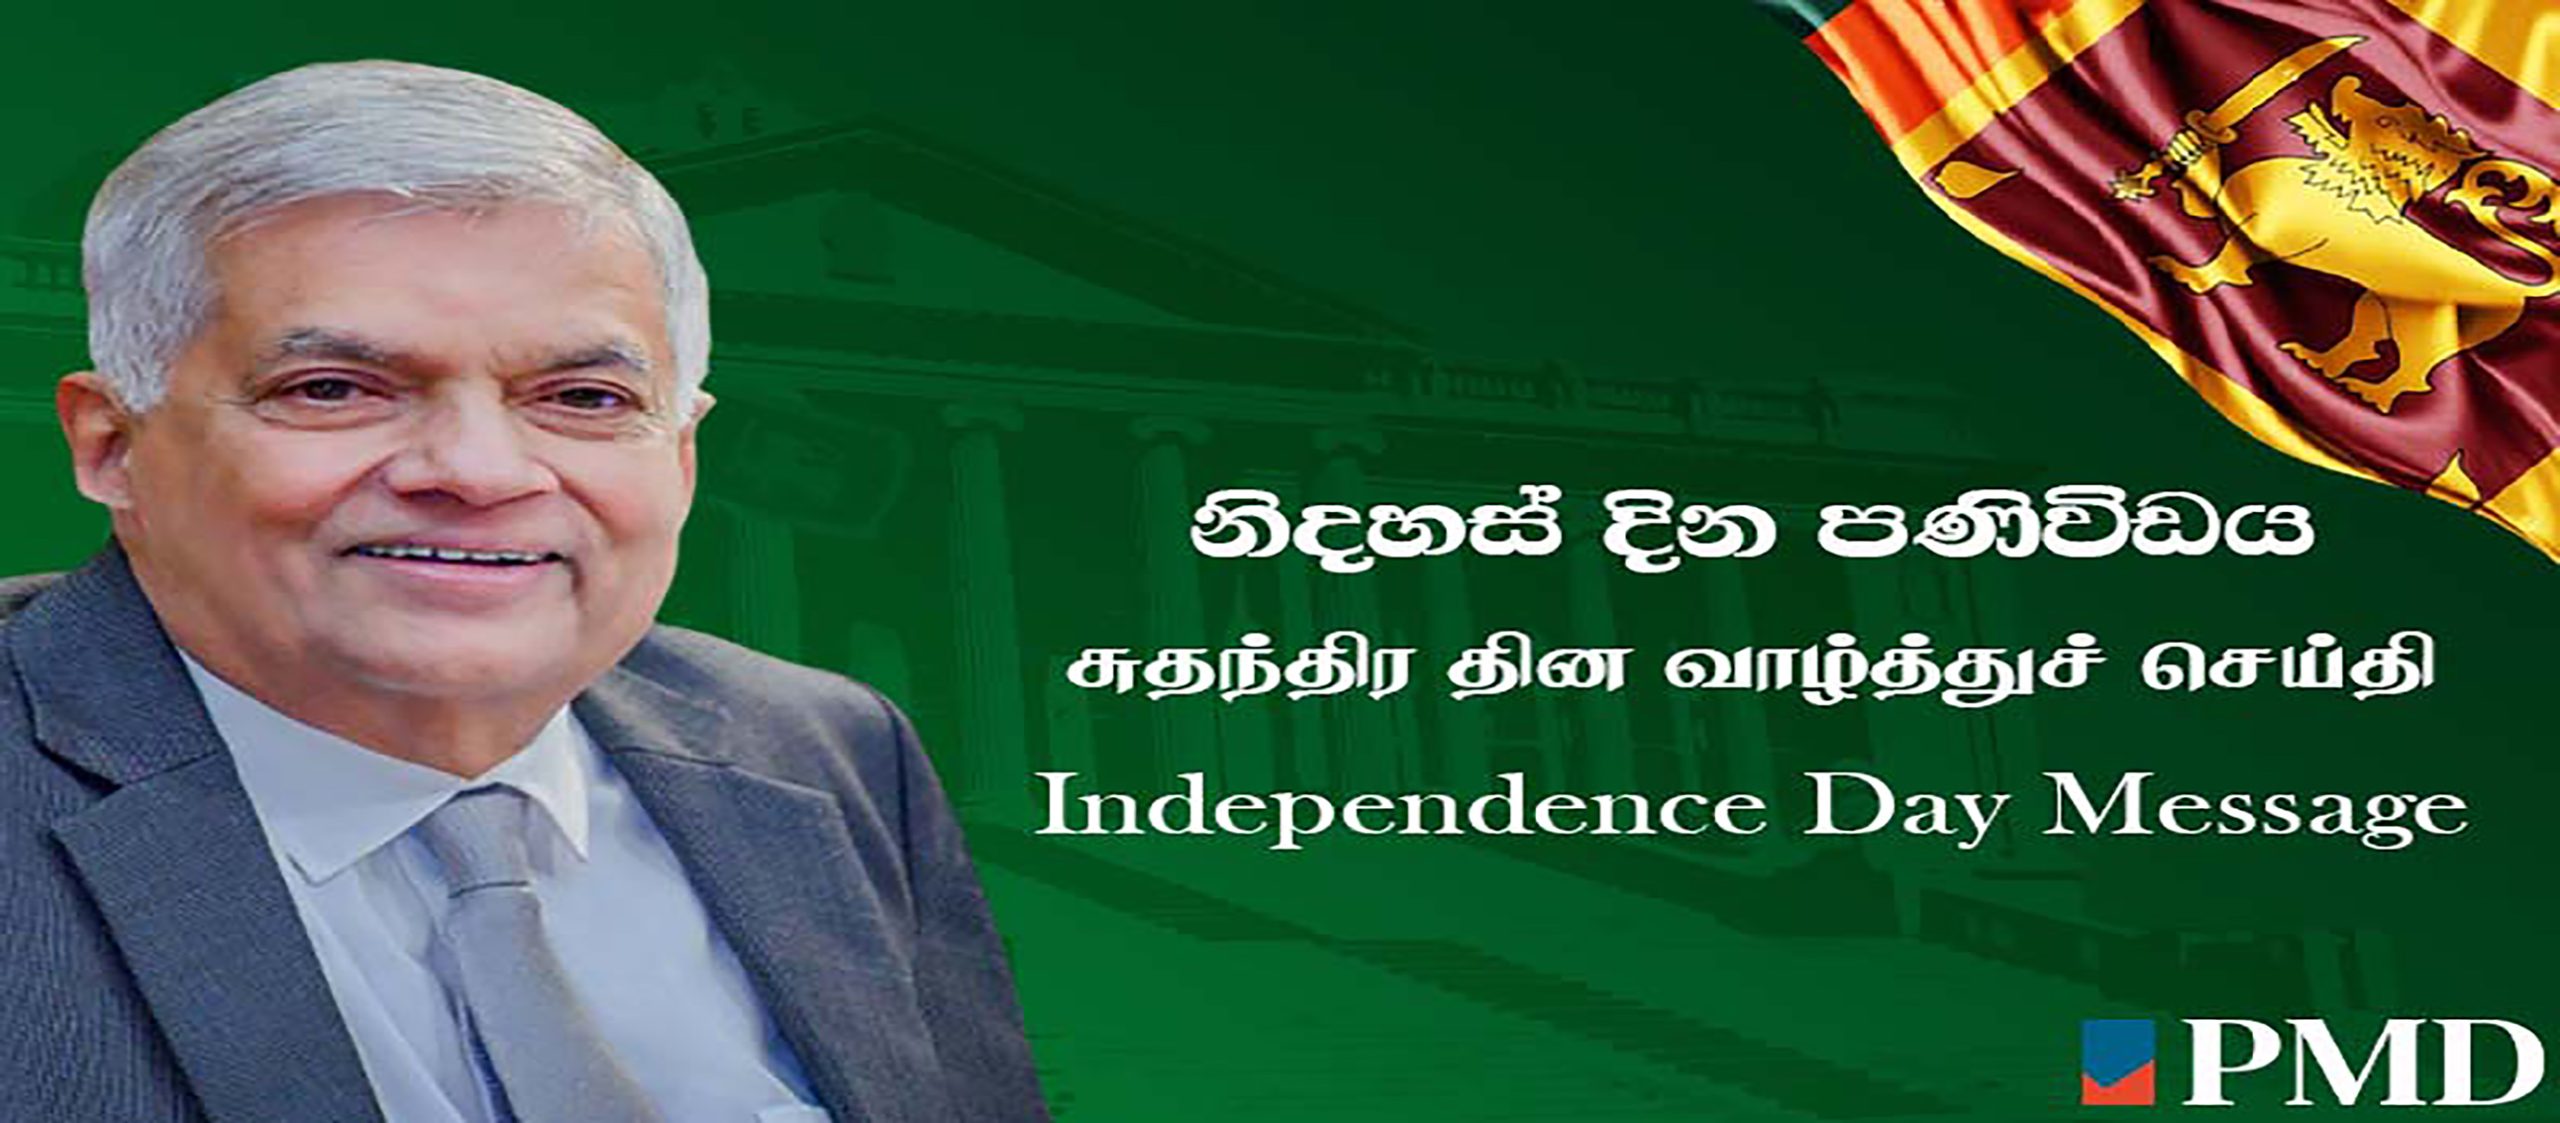 President Ranil Wickremesinghe’s message on the occasion of the 76th Anniversary of Independence Day